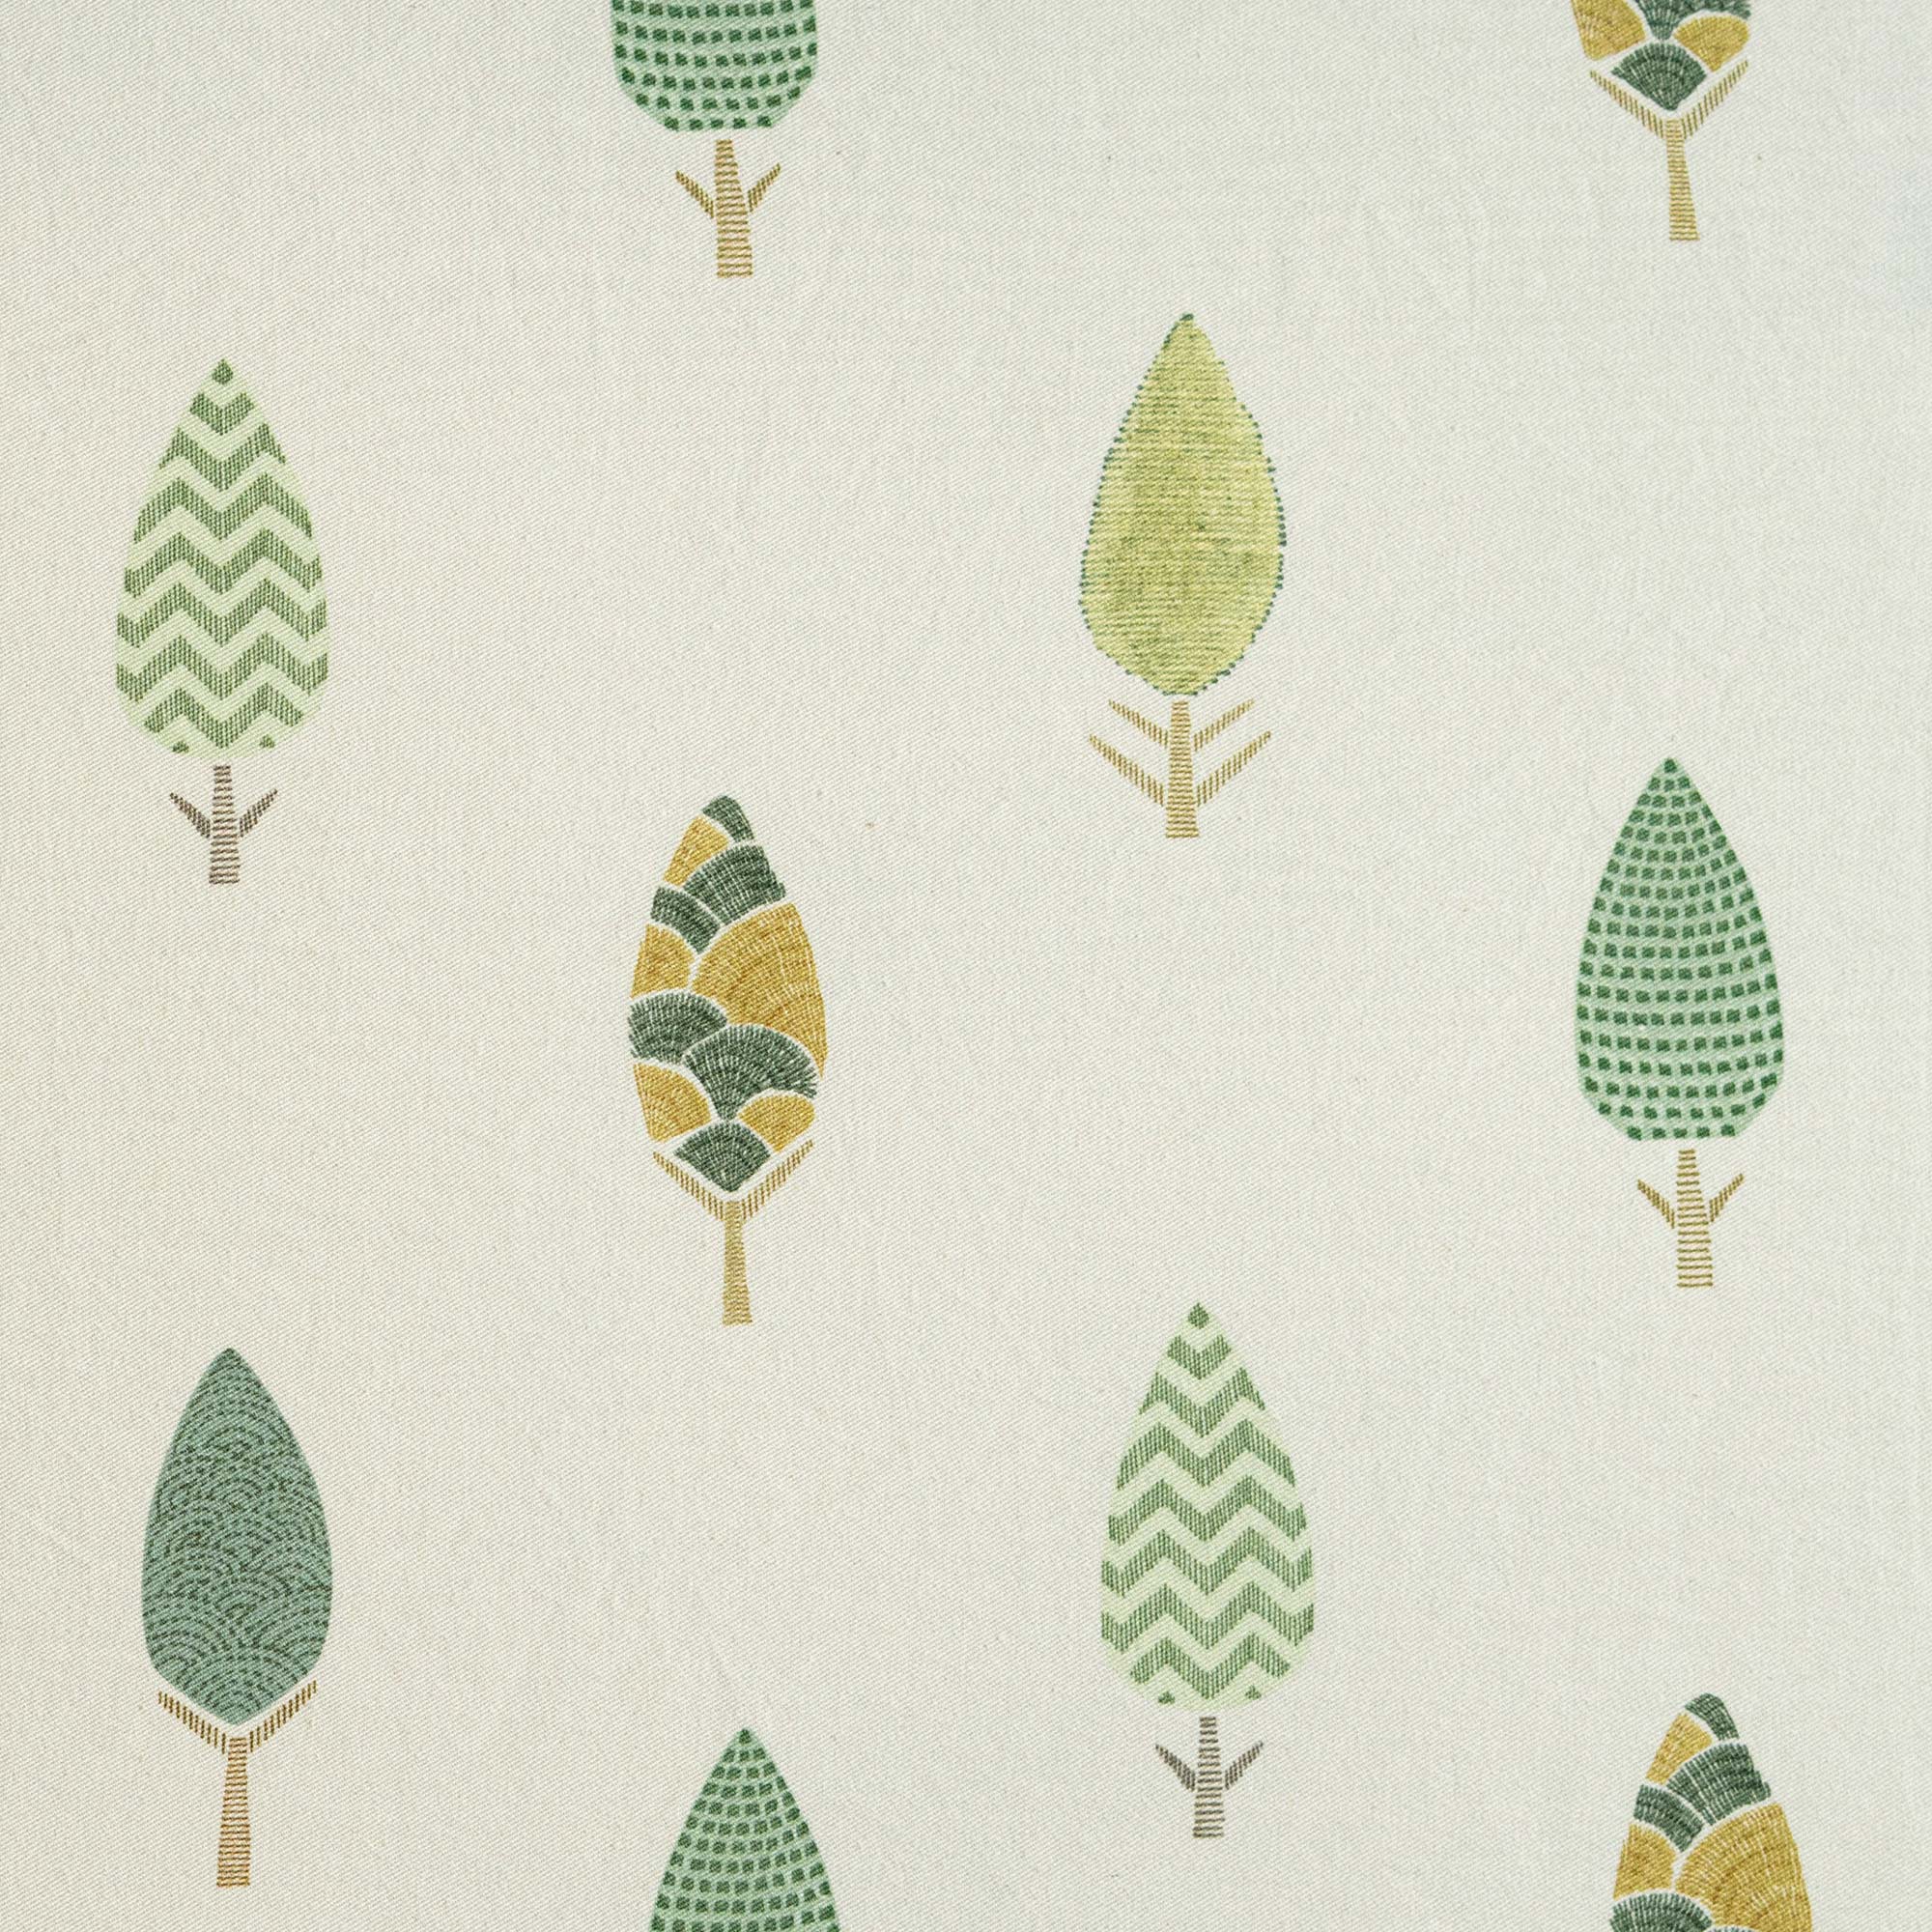 100% Cotton Twill The Magical Forest Fabric Swatch 15cm x 15 cm